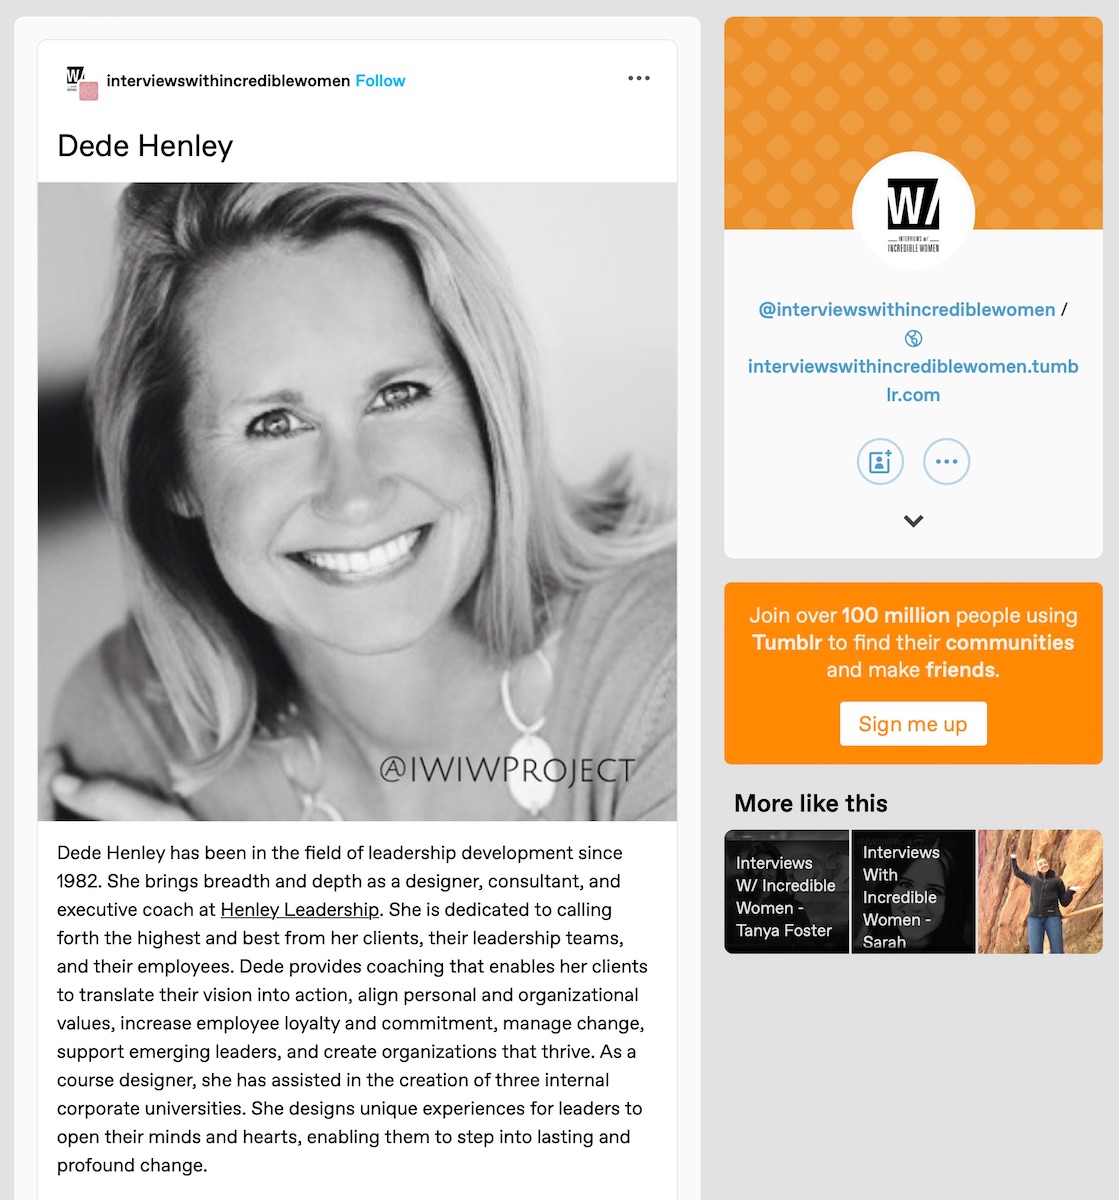 Dede Henley image for interview